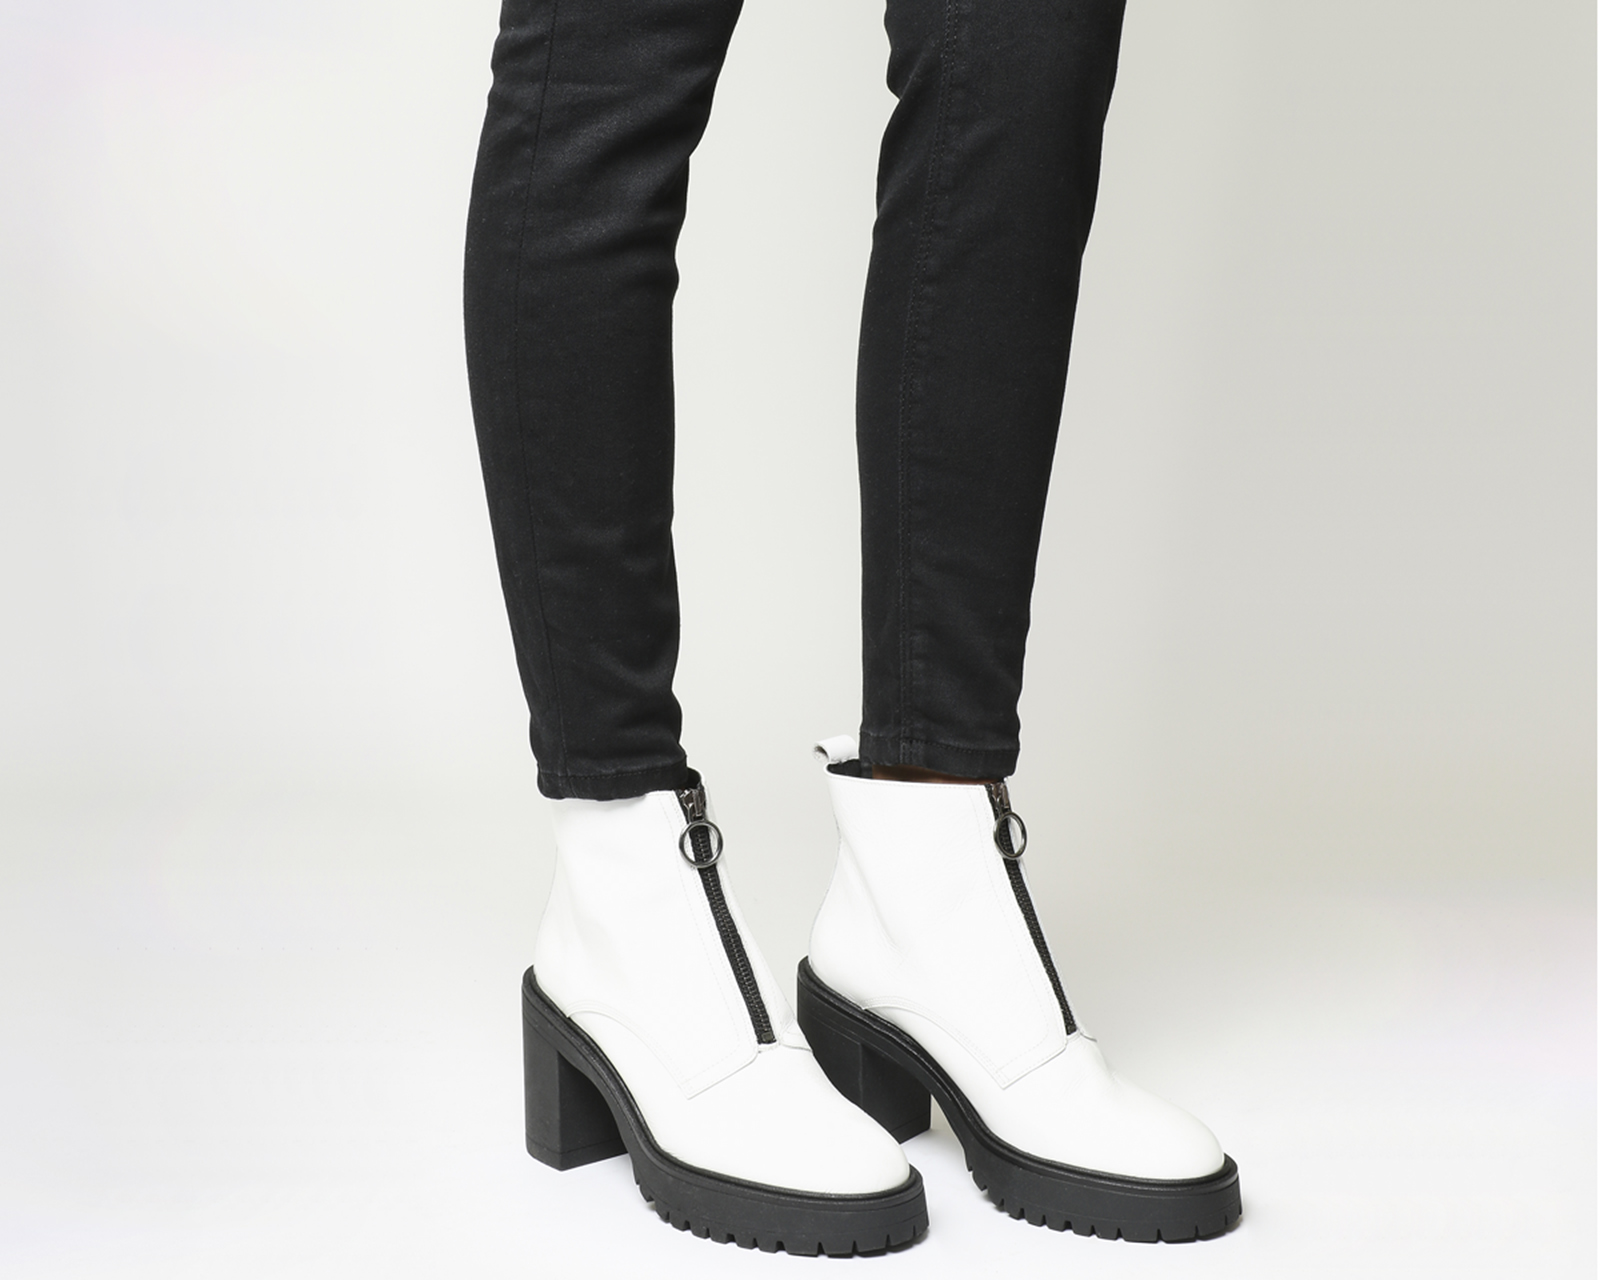 OFFICELive A Little Front Zip Chunky BootsOff White Patent Leather